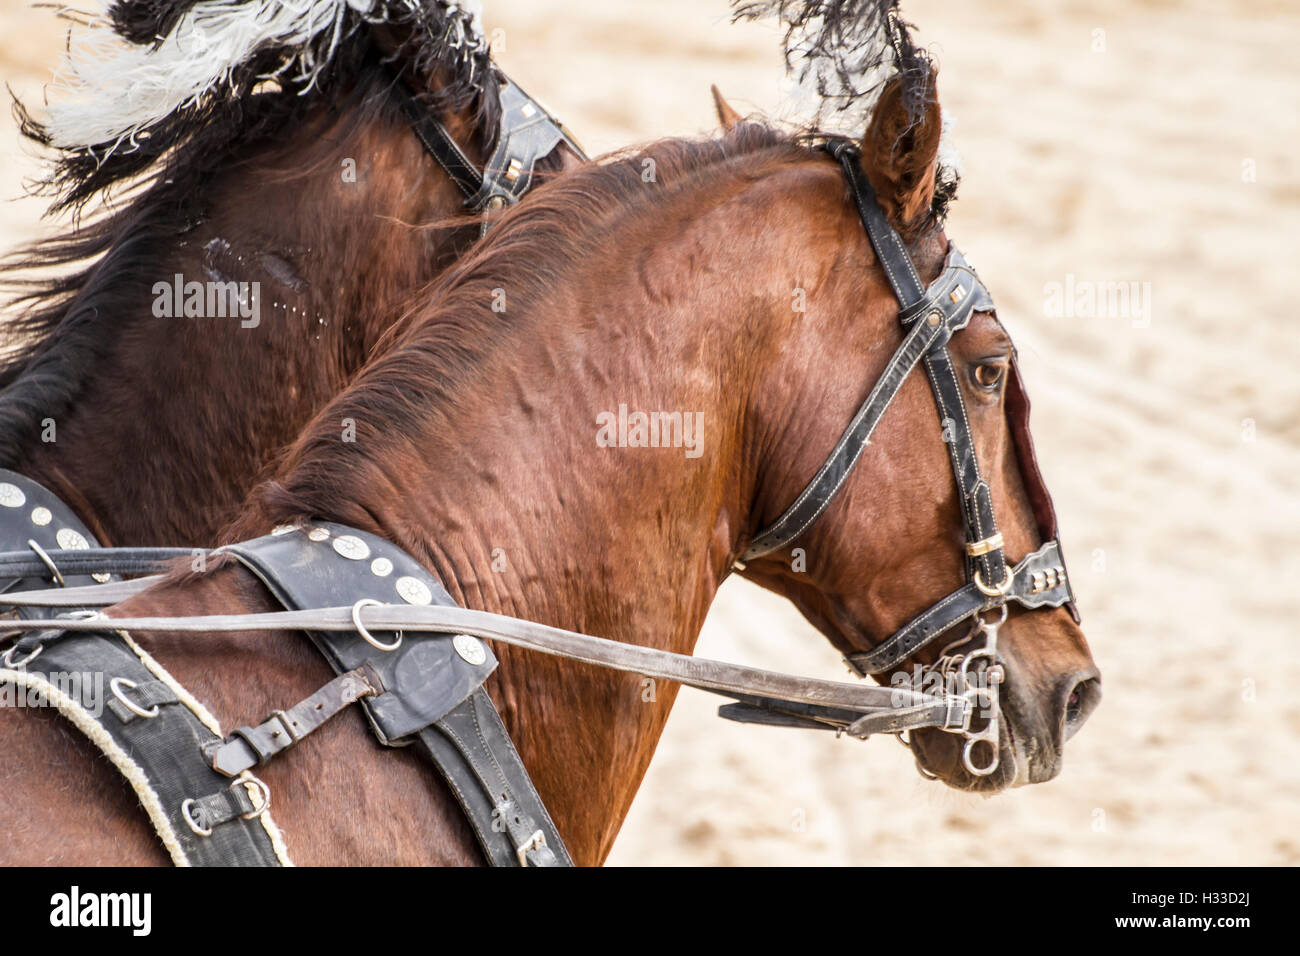 Roman chariots in the circus arena, fighting warriors and horses Stock Photo